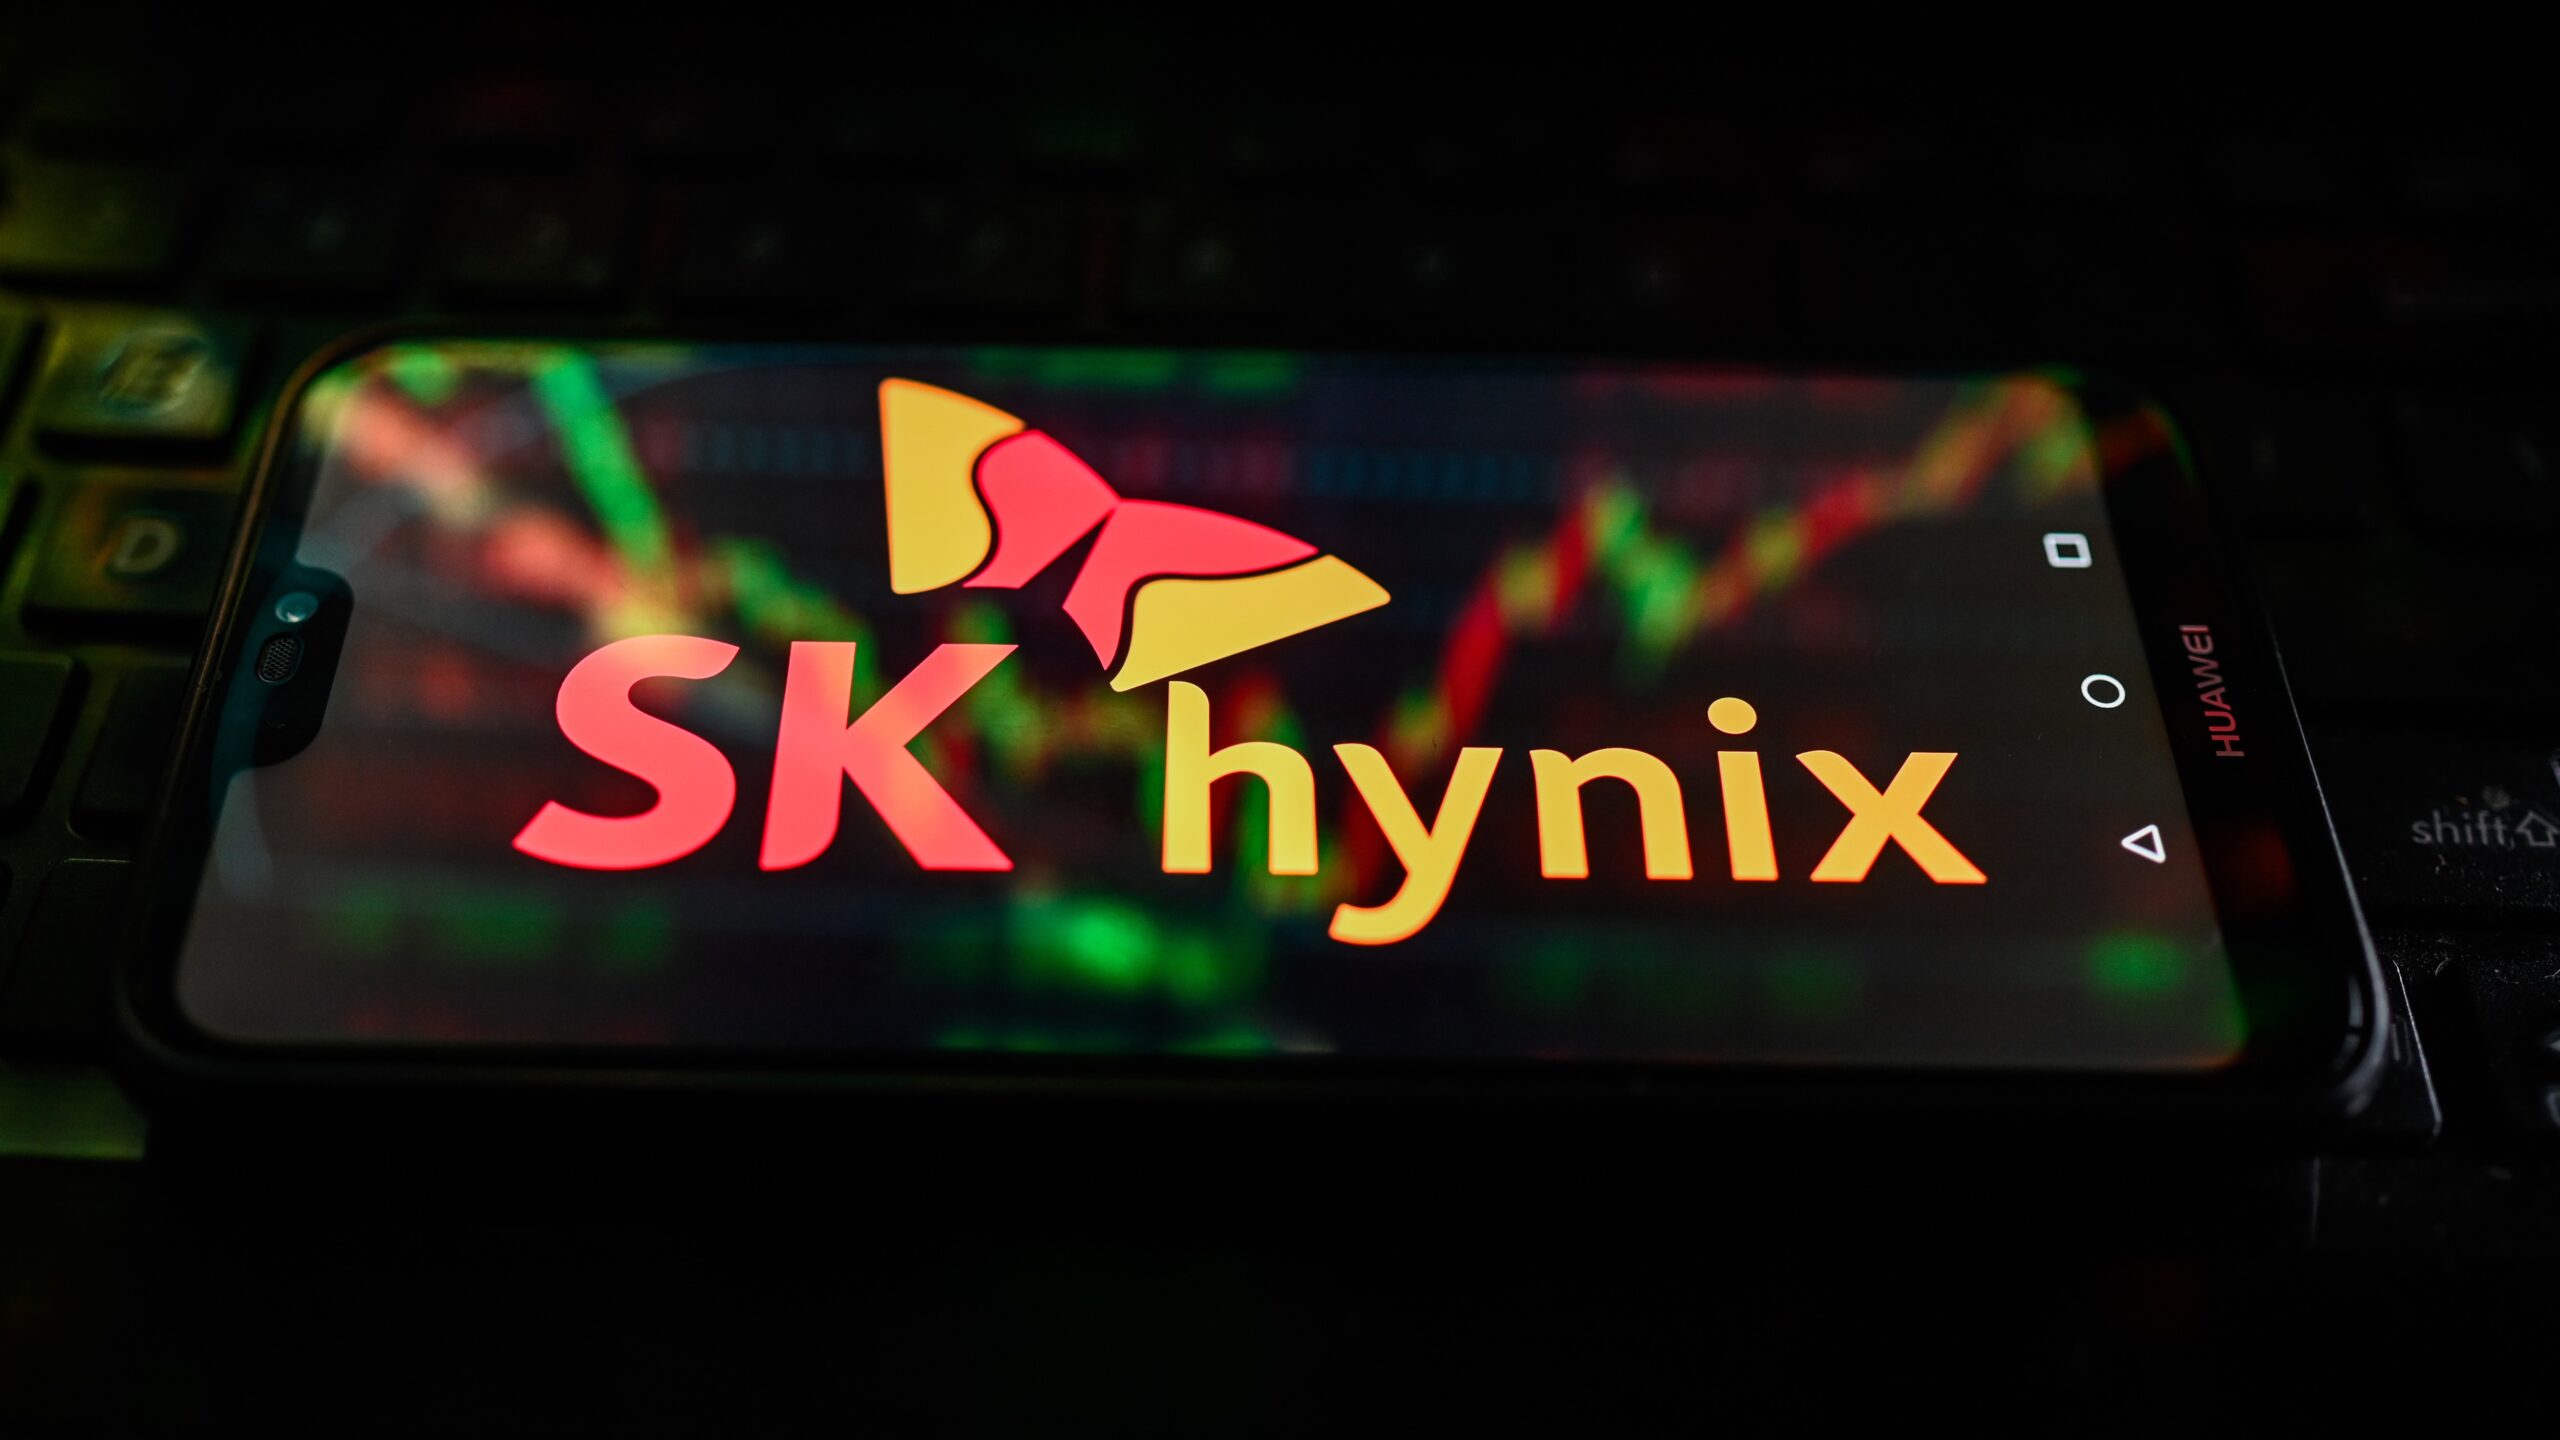 South Korea’s SK Hynix plans to invest $75 billion in AI and chip development by 2028.